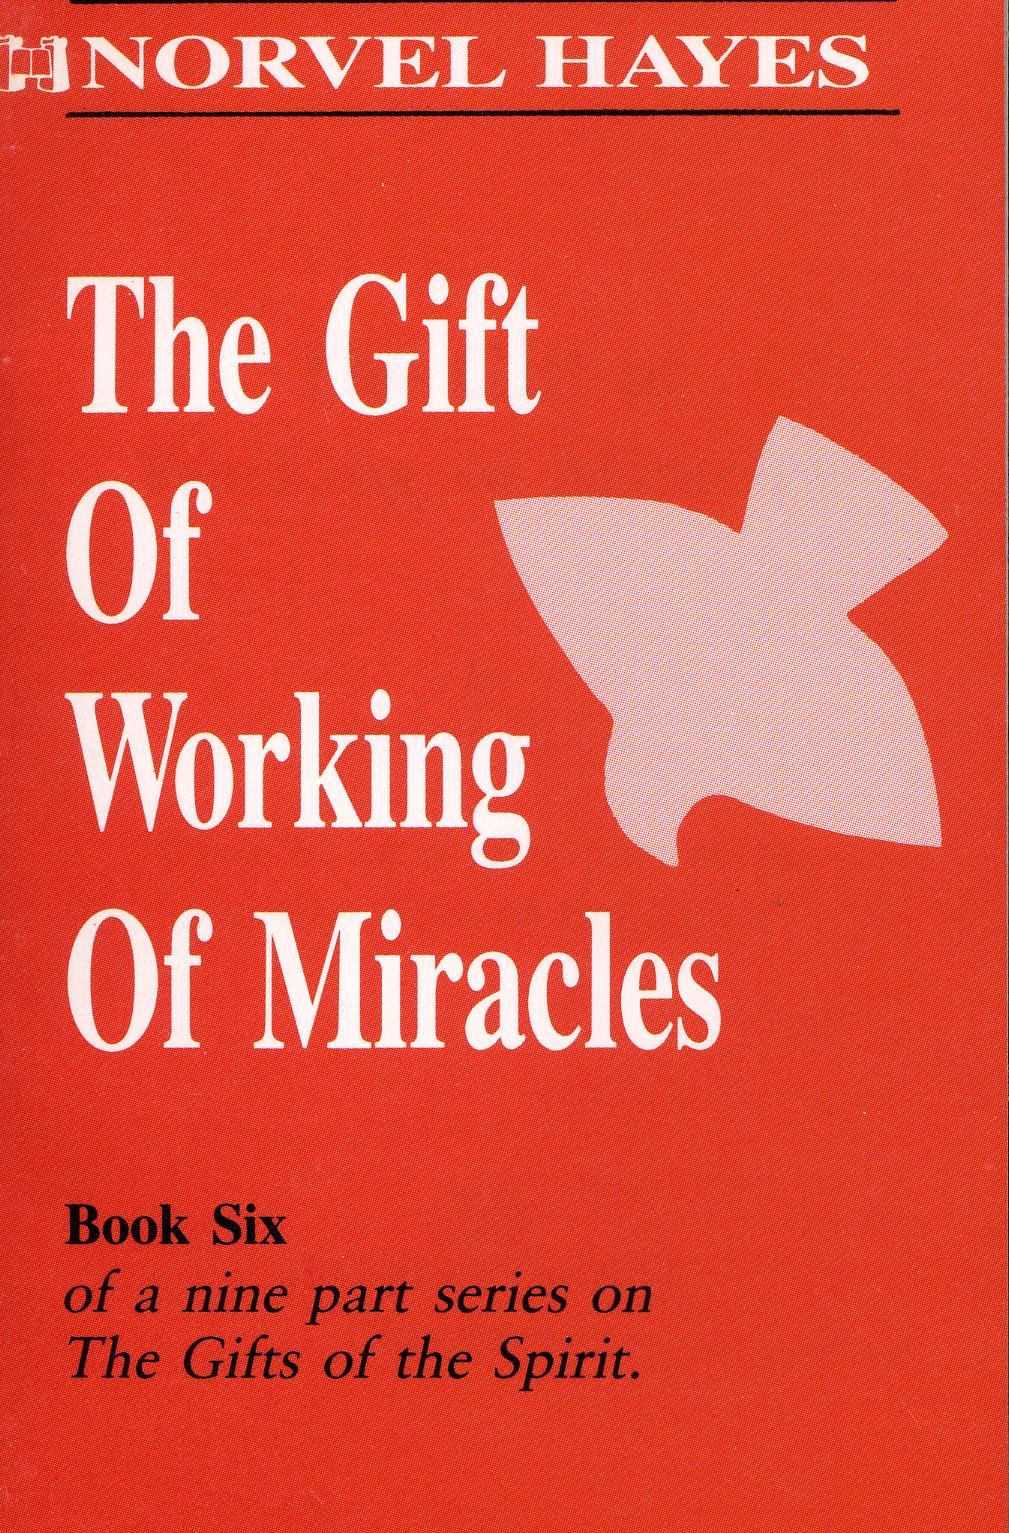 Englische Bücher - N. Hayes: The Gift of Working of Miracles